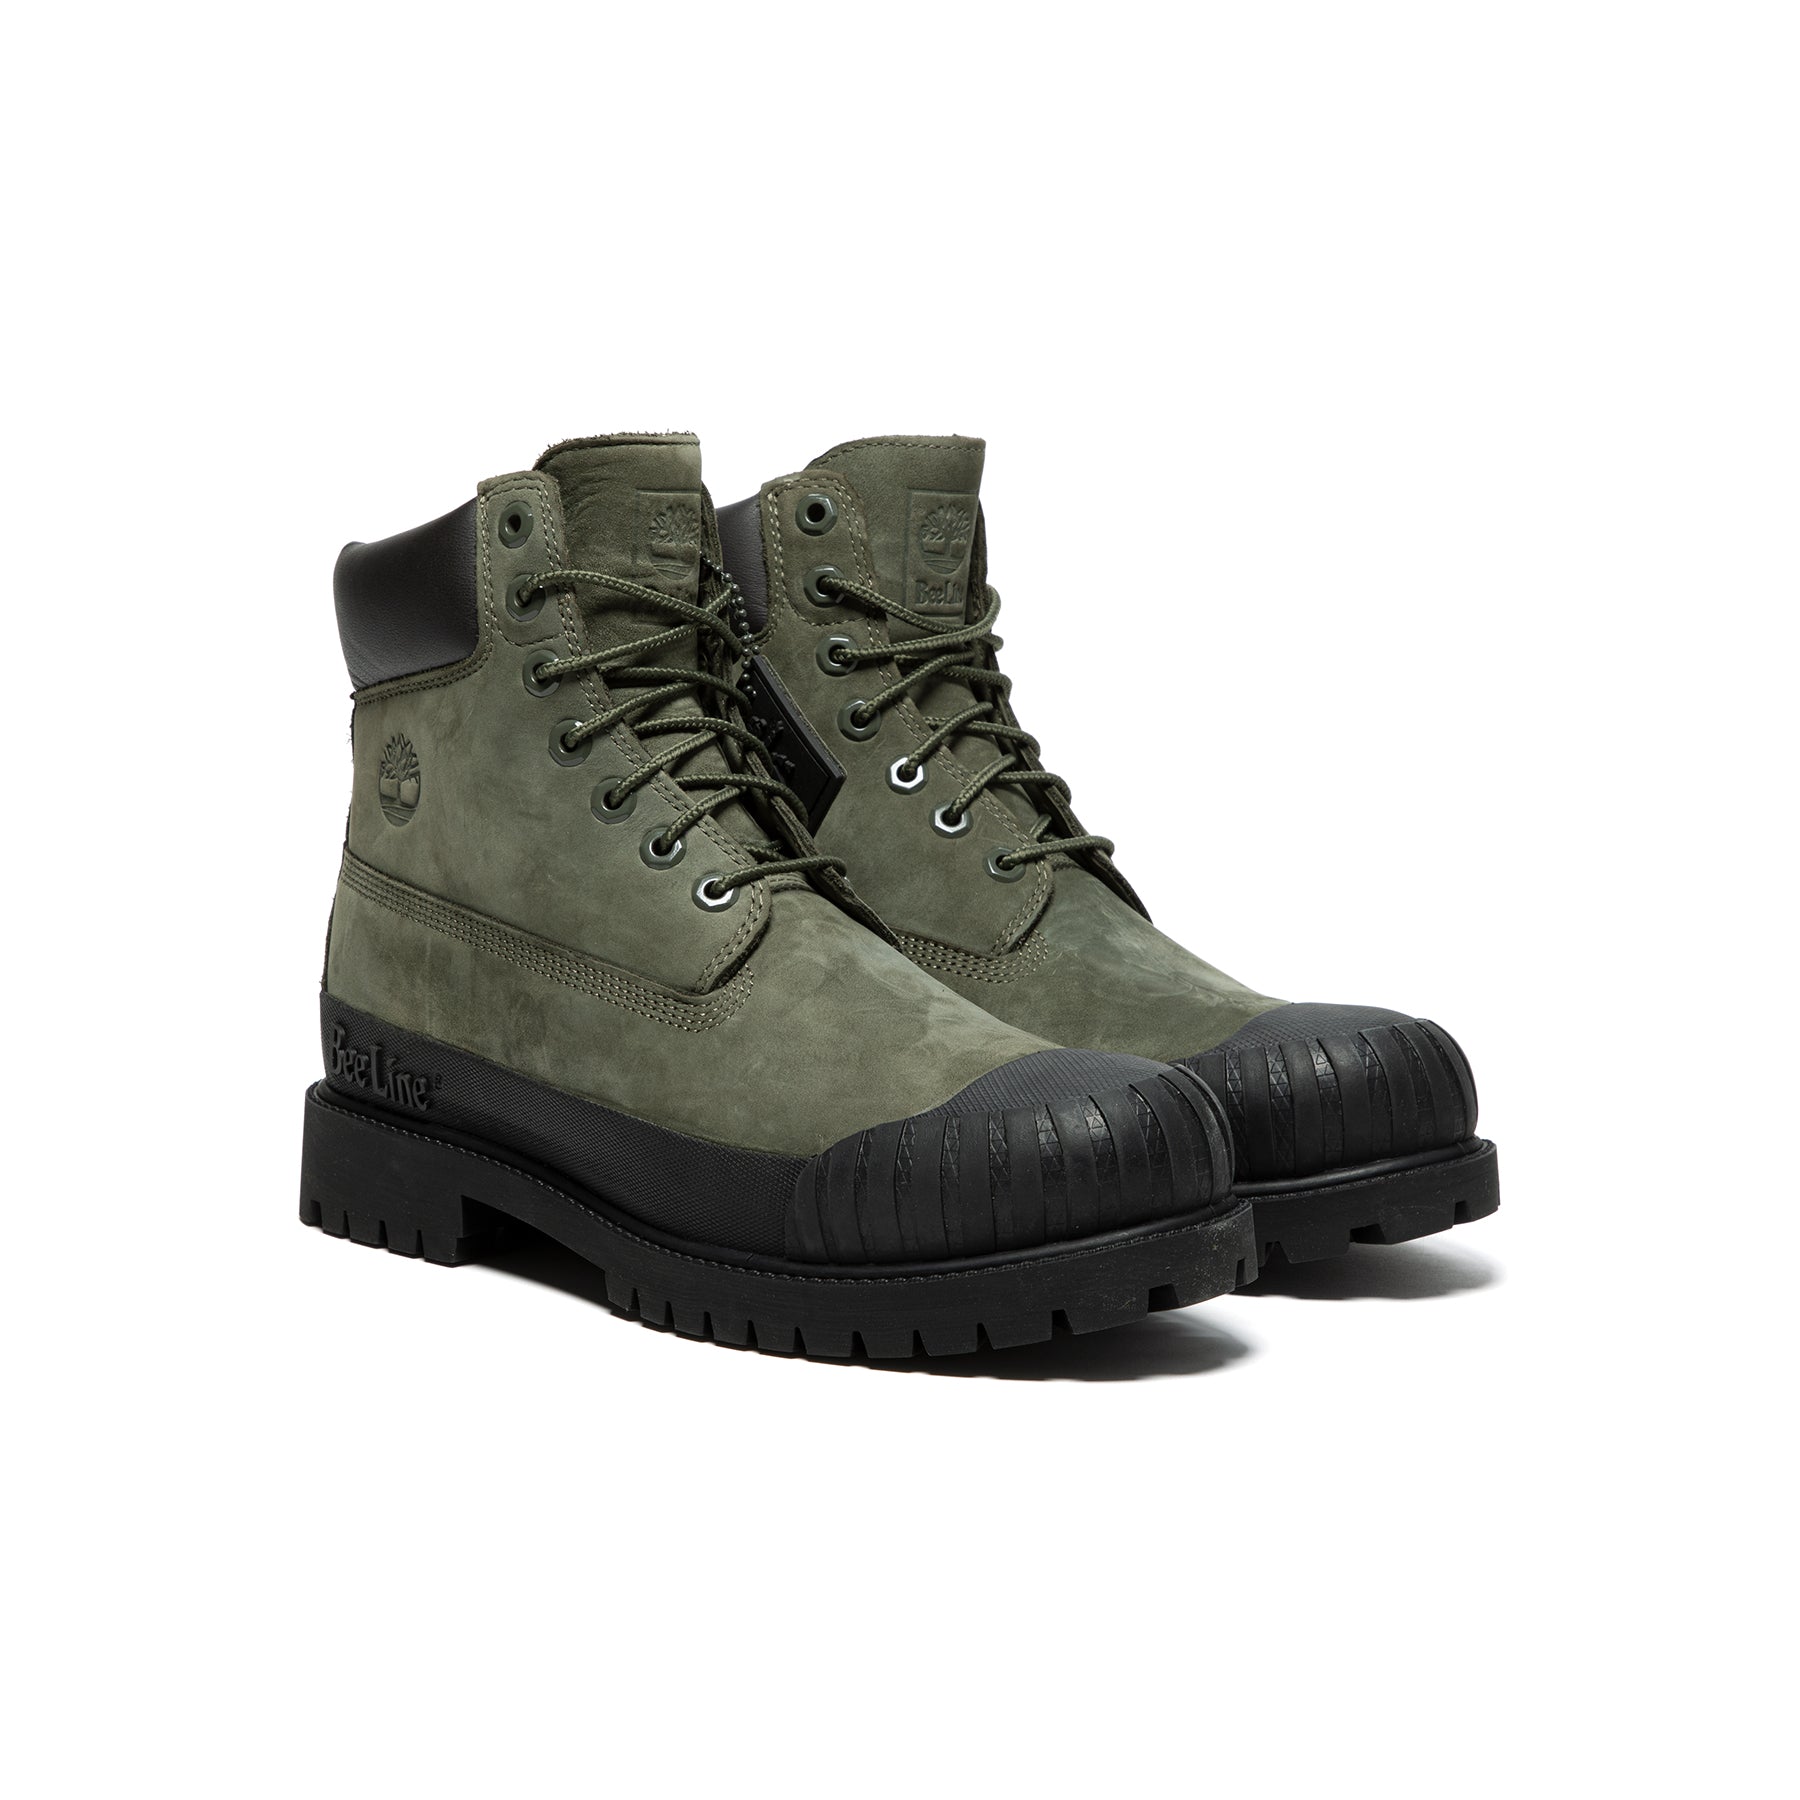 Soedan Injectie steak Timberland 6 inch Rubber Toe (Olive/Black) – Concepts